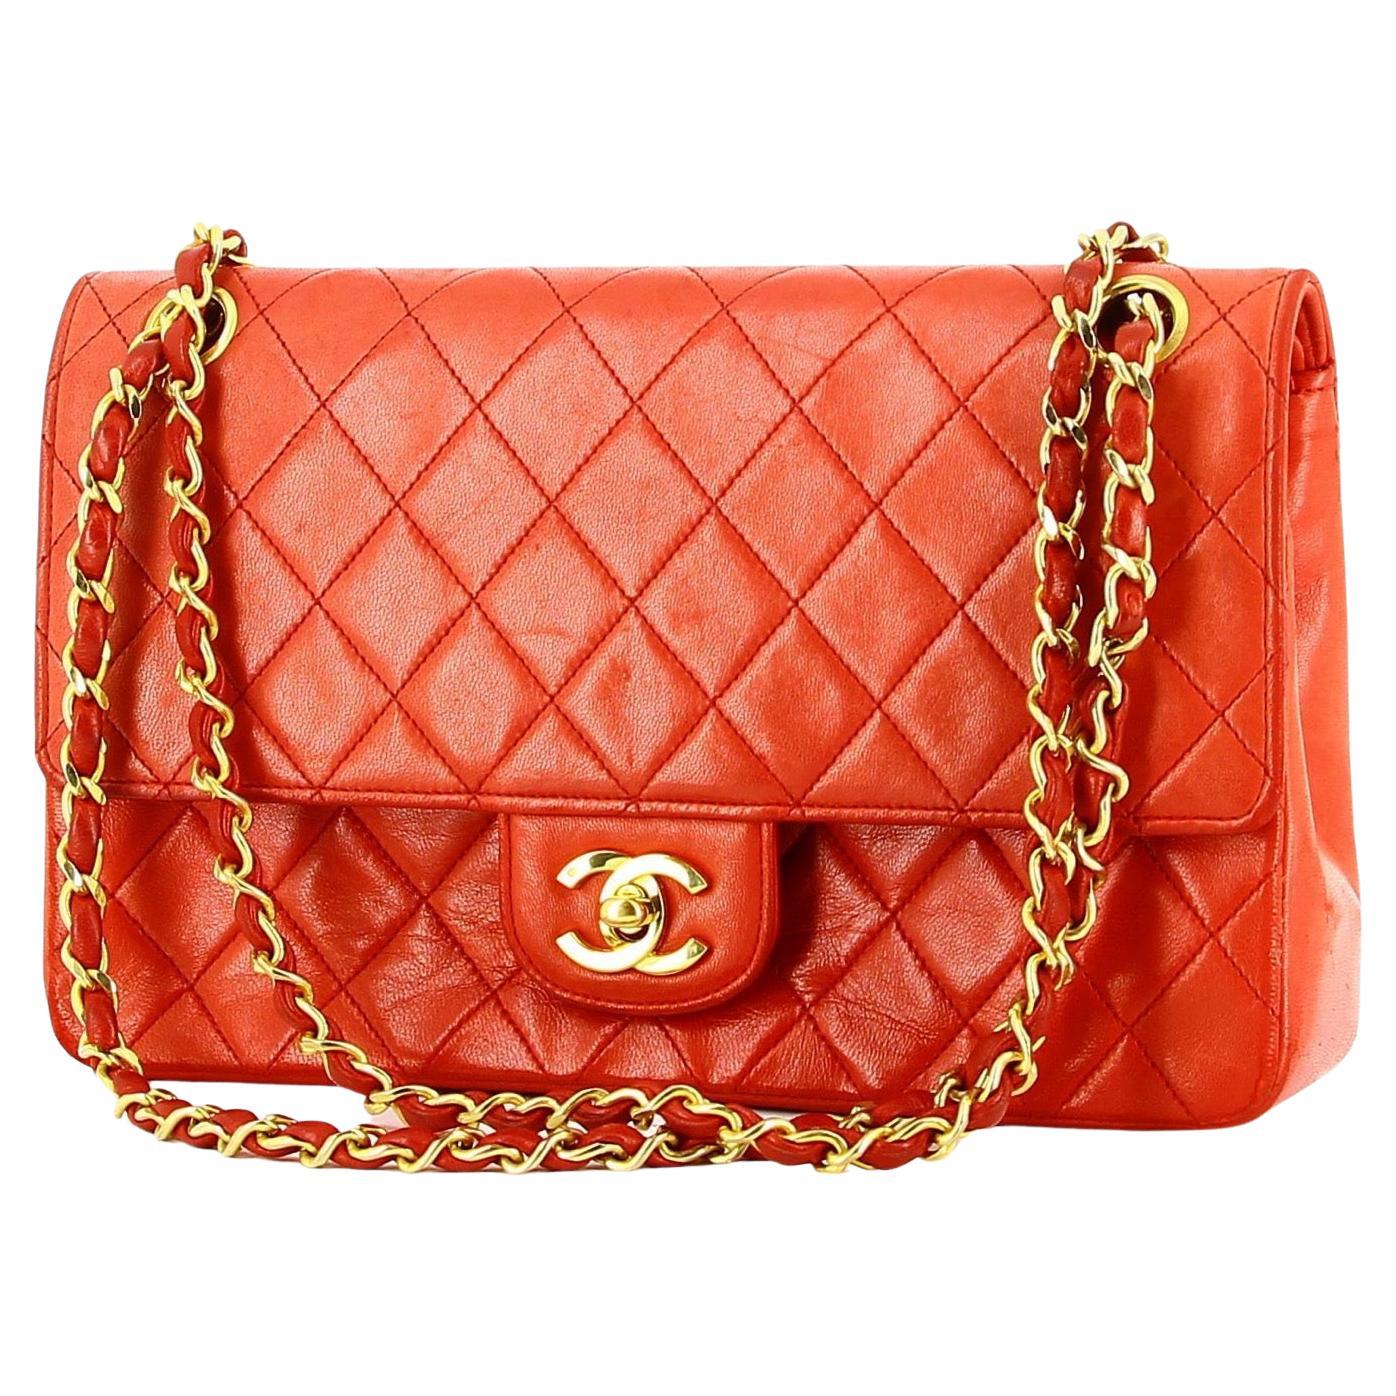 Chanel Red Timeless Bag